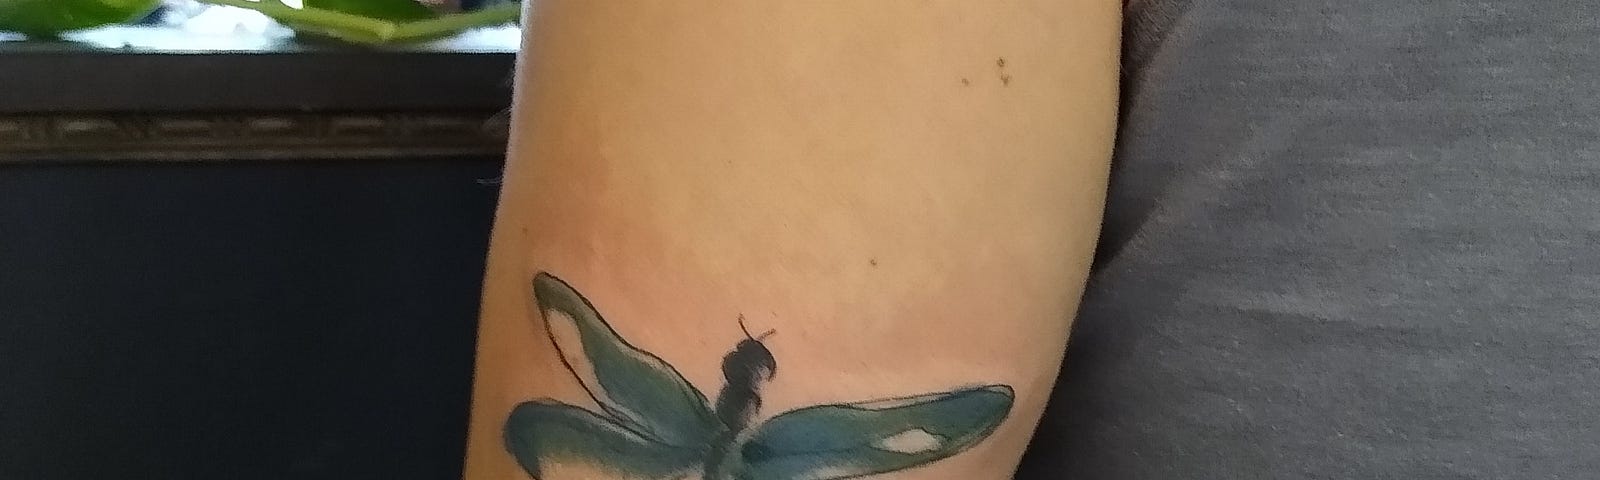 The Woman With the Dragonfly Tattoo | by Liz Gallo | Fearless She Wrote |  Medium